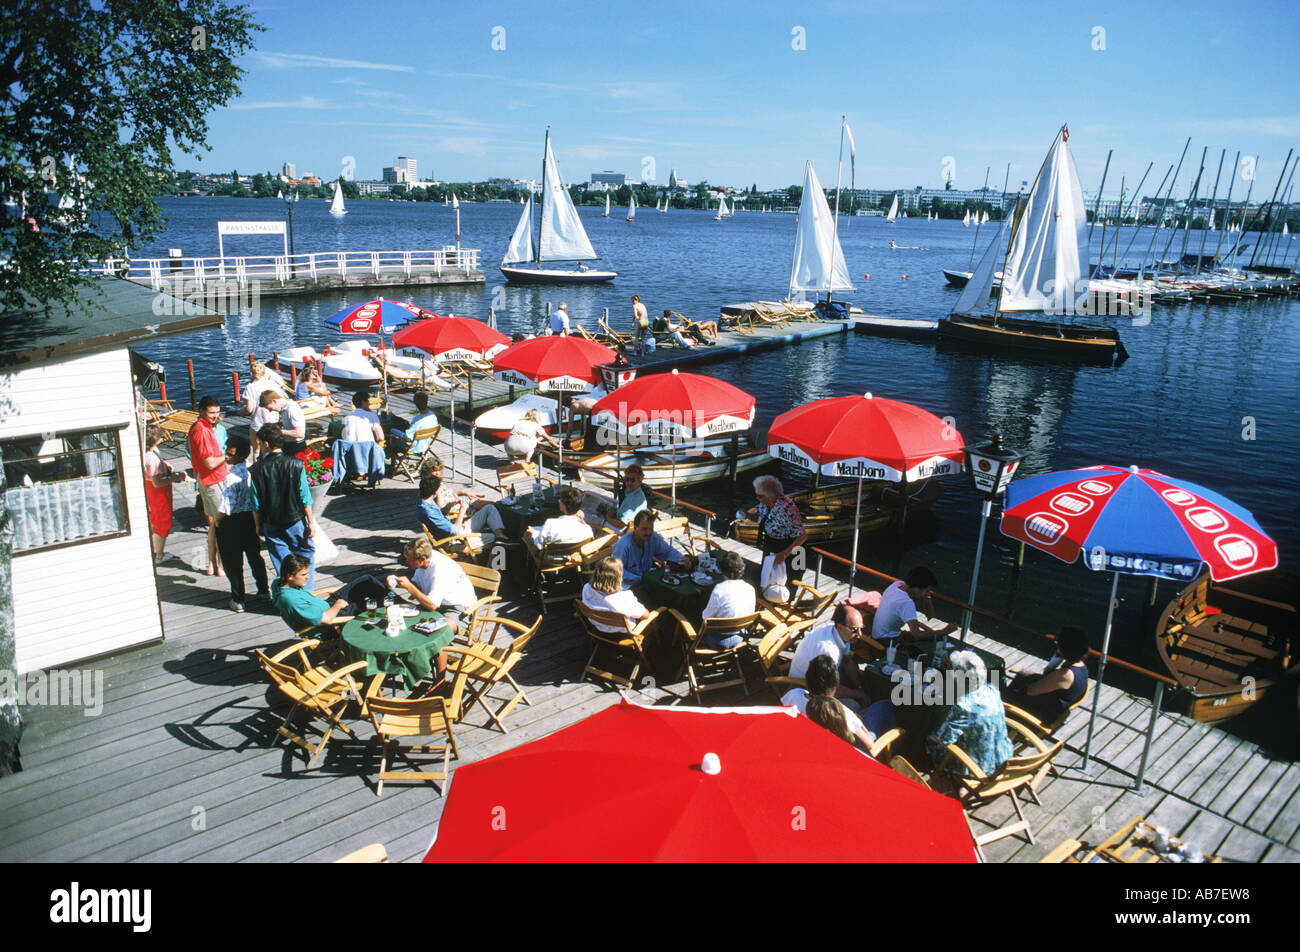 Pier cafe and tables with sailboats on Alster Lake in the middle of Hamburg in Northern Germany Stock Photo